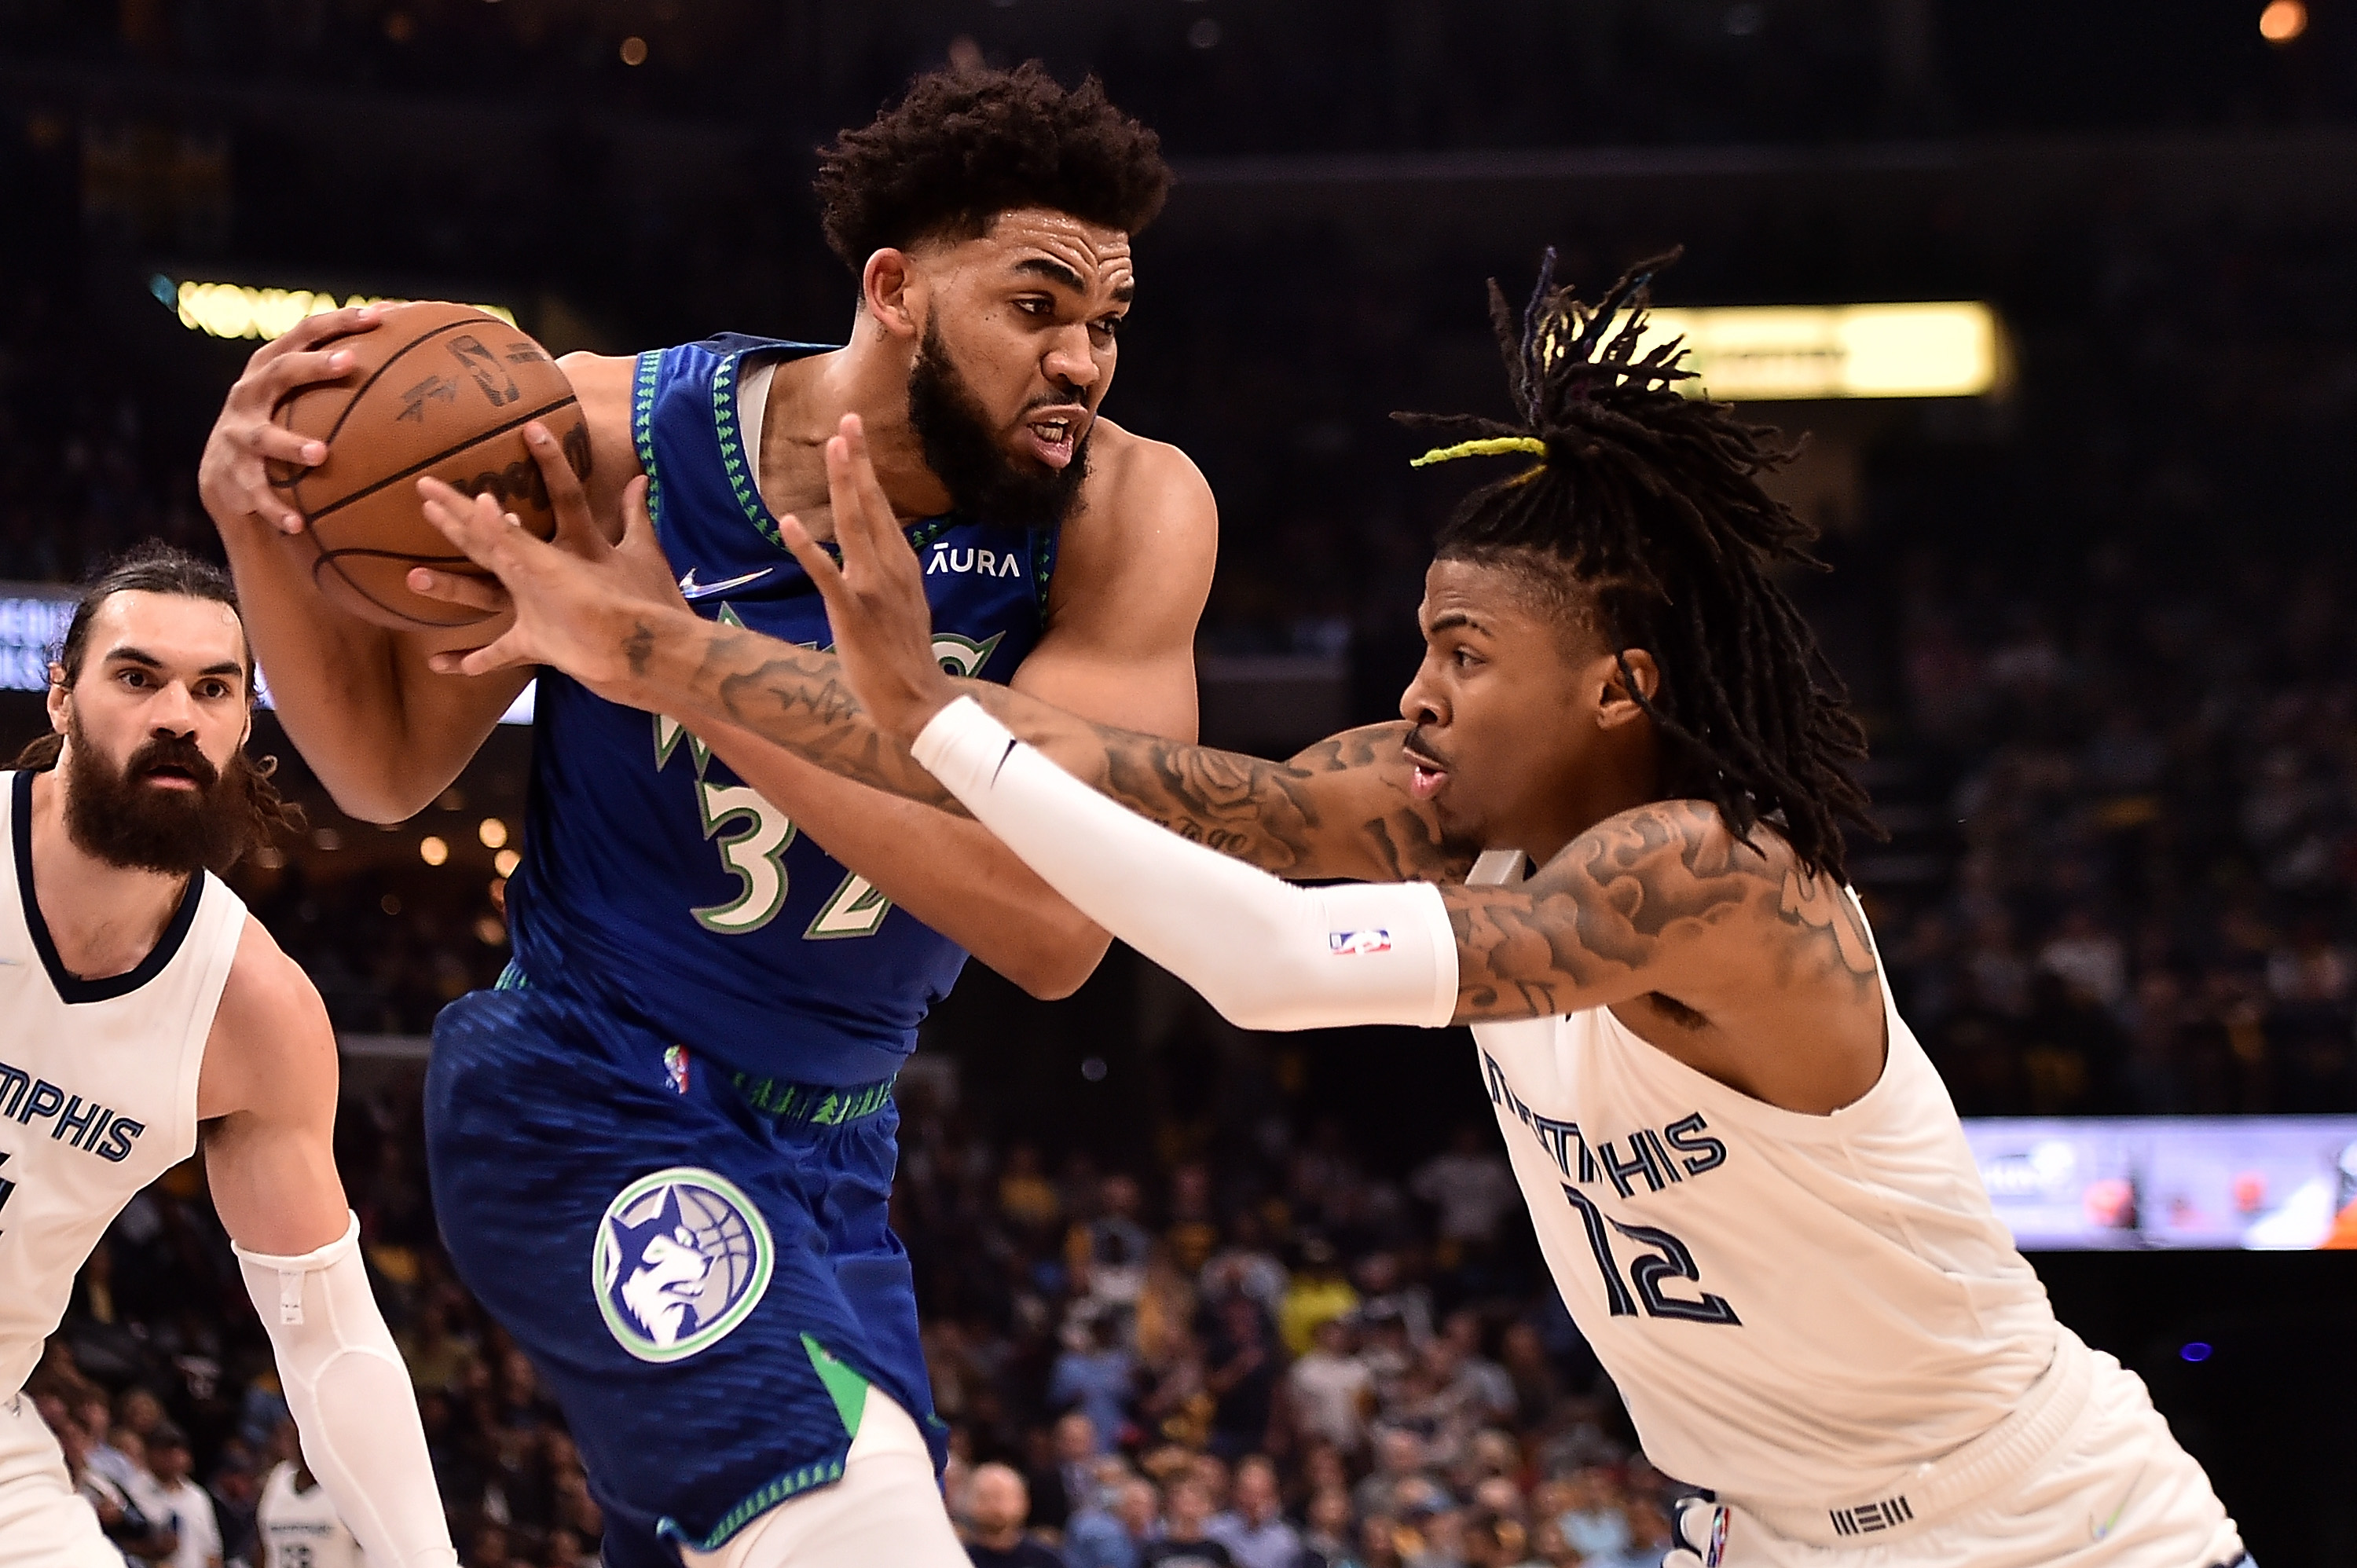 Memphis Grizzlies at Minnesota Timberwolves free live stream (4/23/22) How to watch Game 4 of NBA playoff series, channel, time